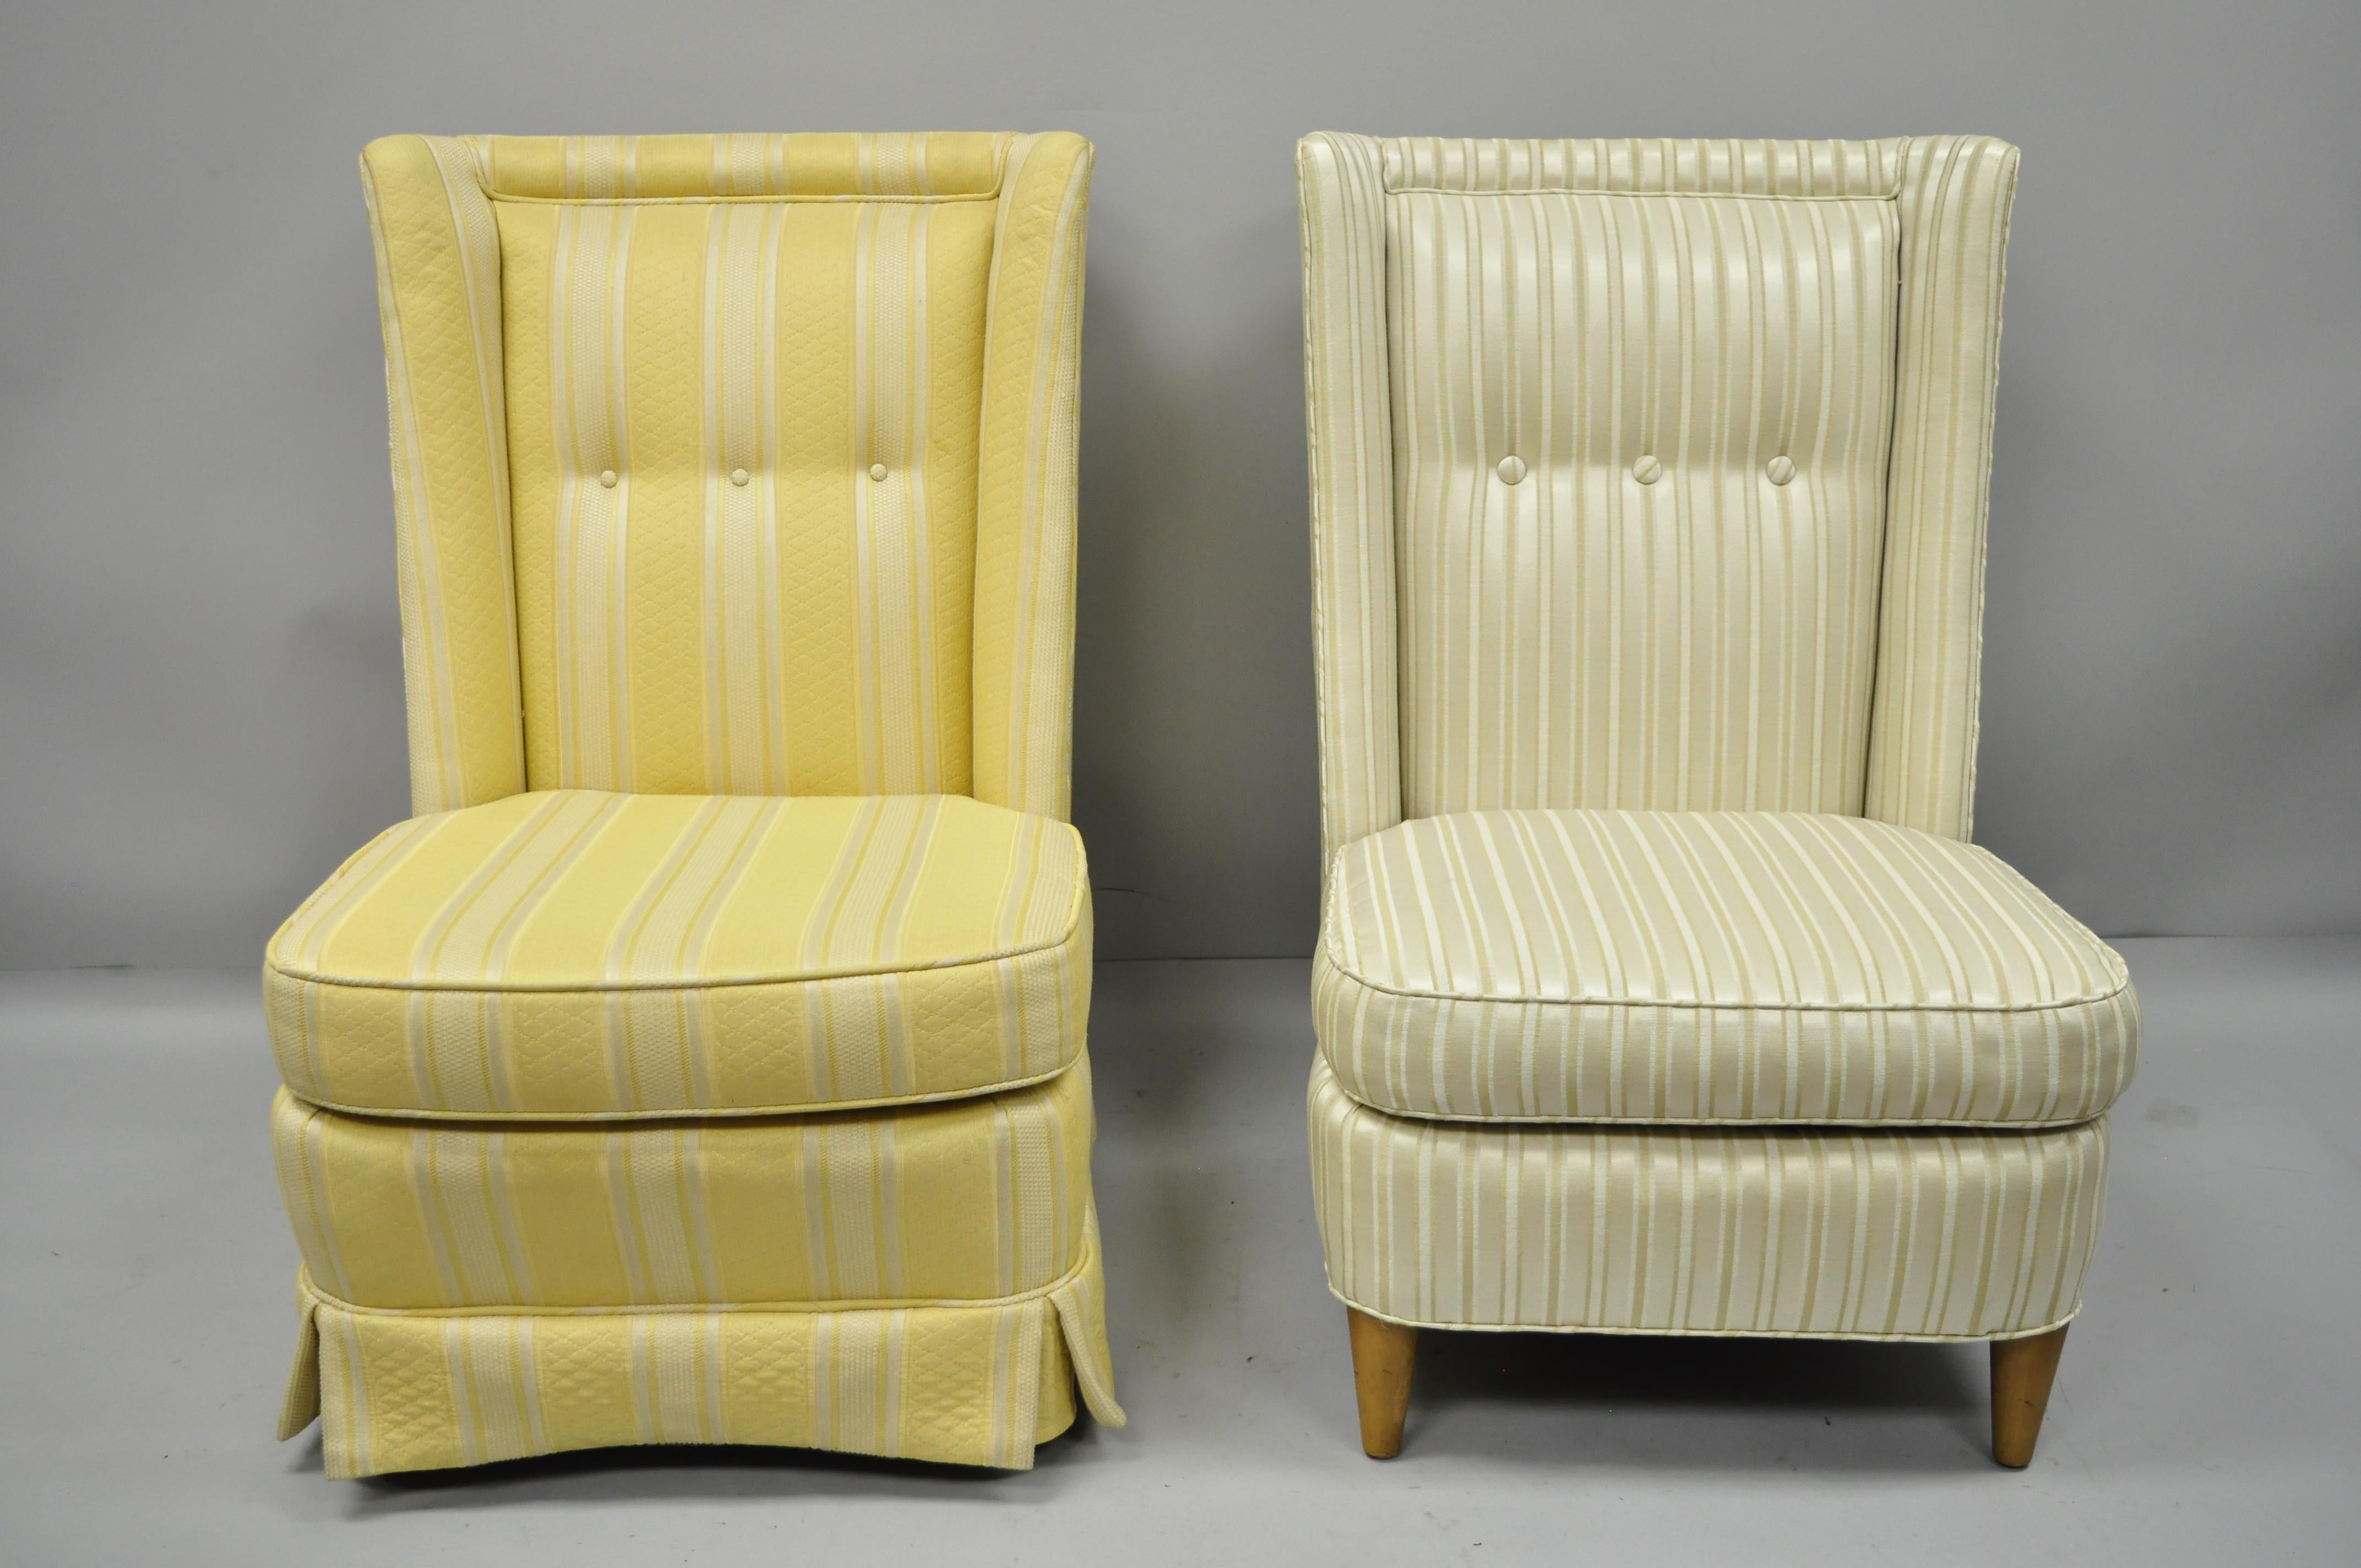 A pair of Paul Laszlo upholstered barrel back lounge chairs. Item features fully upholstered barrel backs, heavy solid wood construction, short tapered legs, and clean modernist lines, circa 1950. Measurements: 36